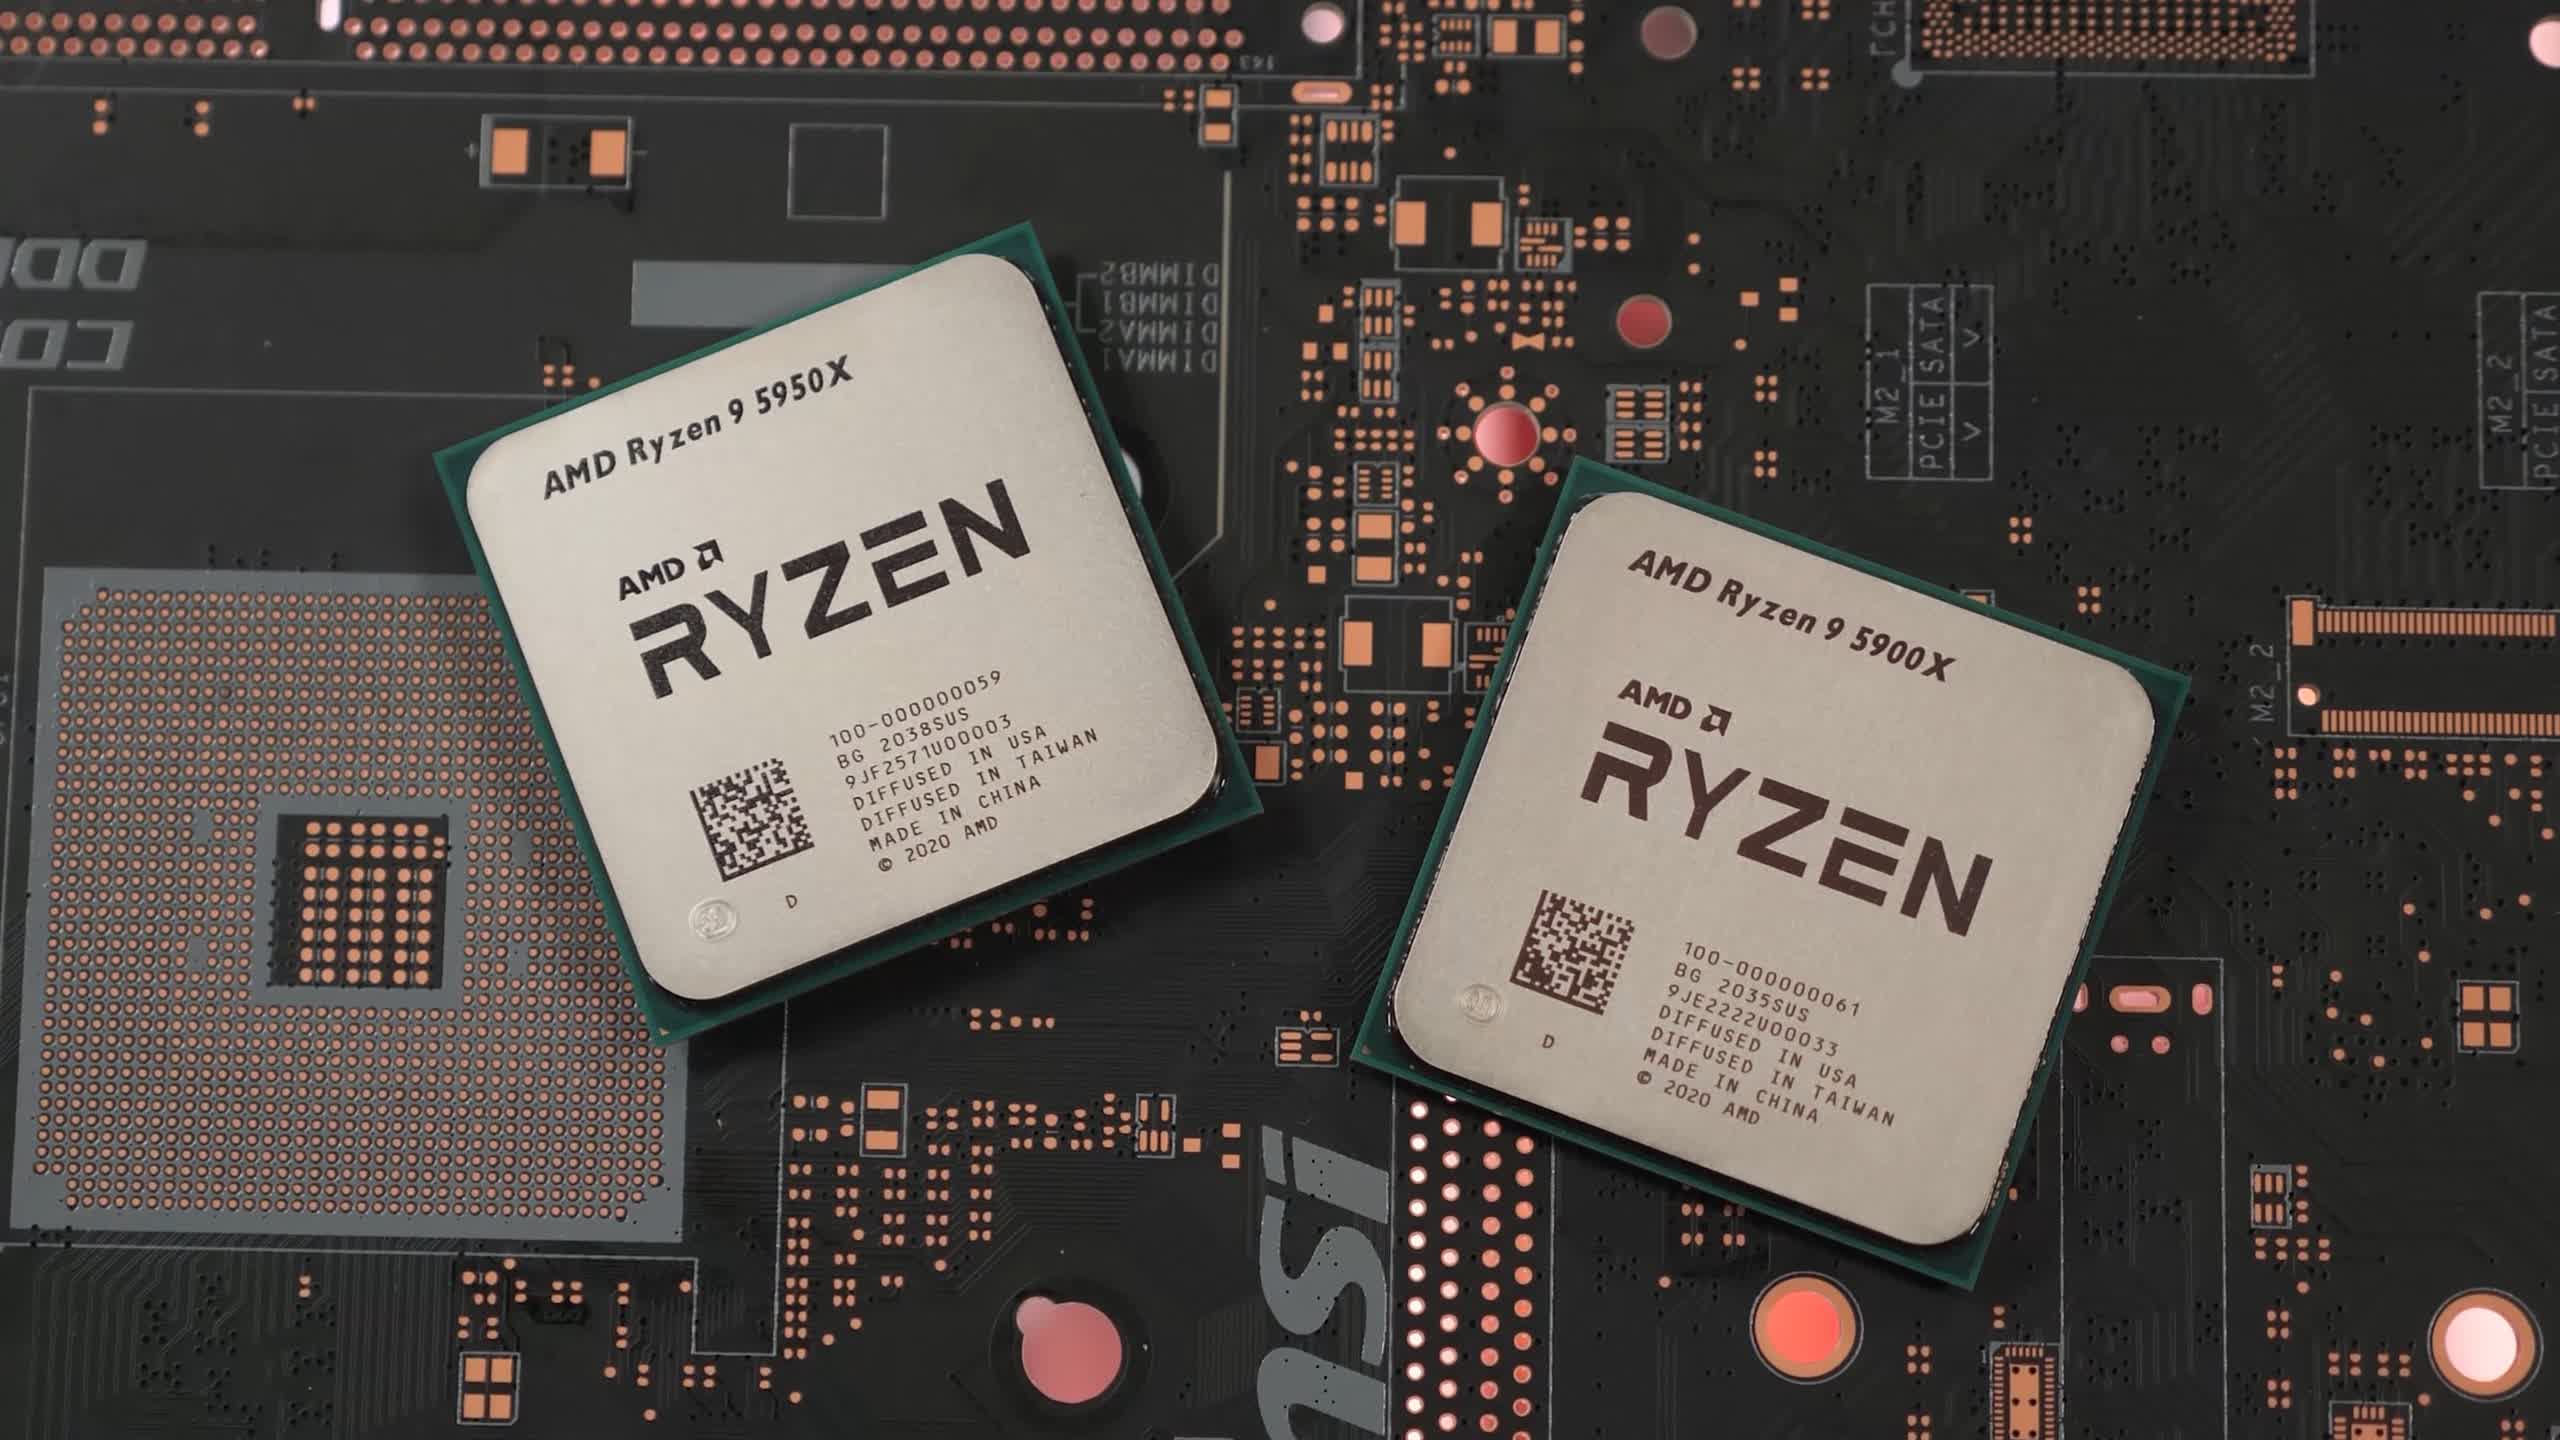 AMD Adrenalin can reportedly change CPU settings without telling users